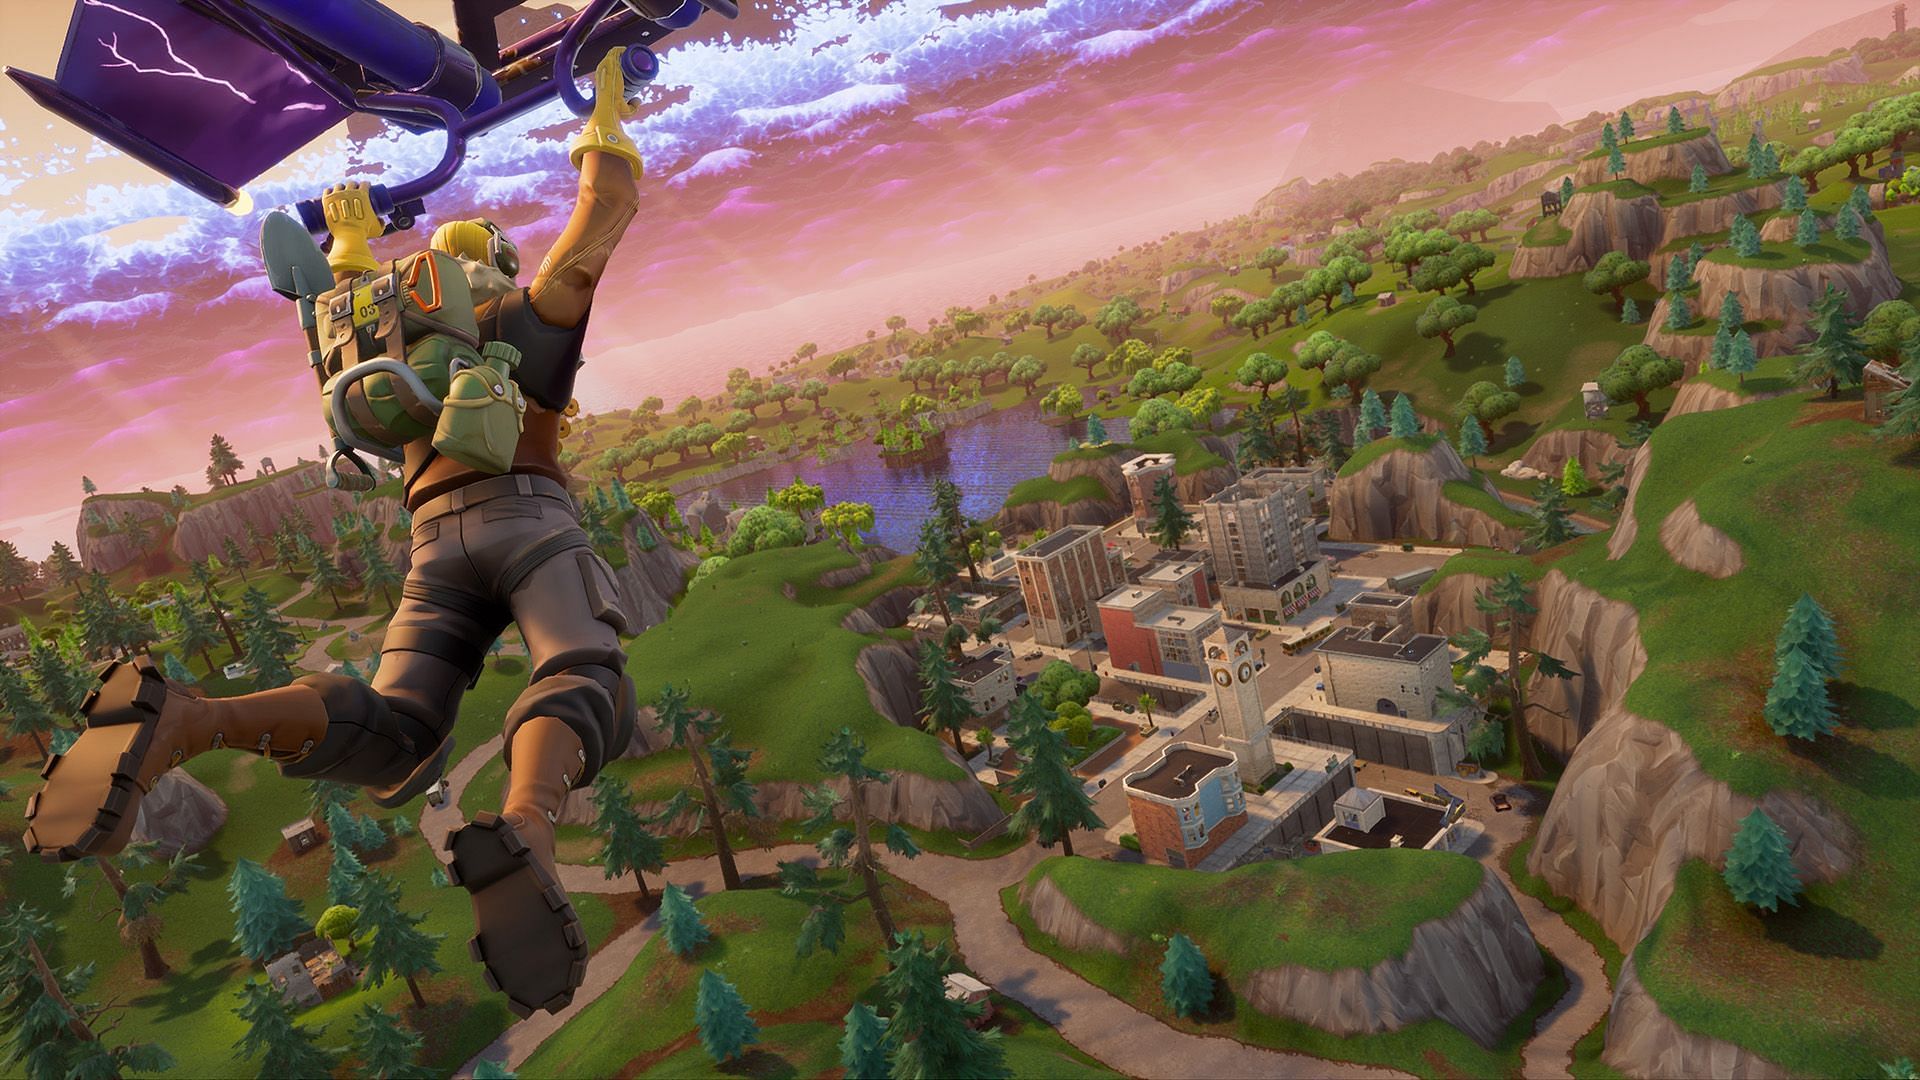 A player gliding down to the island (Image via Epic Games)